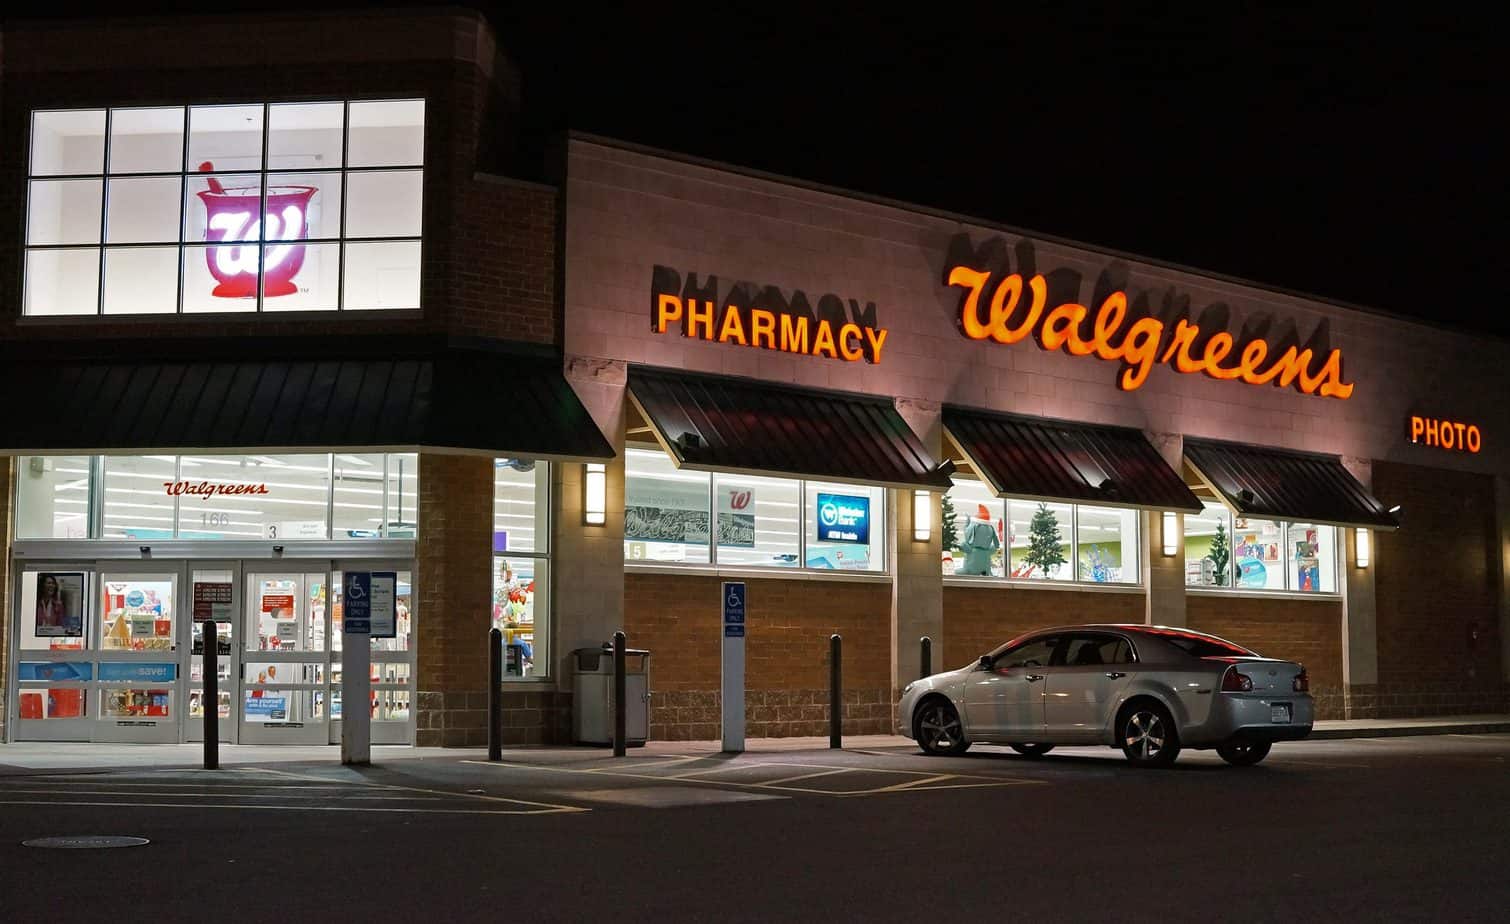 Walgreens Mission Statement Analysis and Vision [UPDATED 2019]